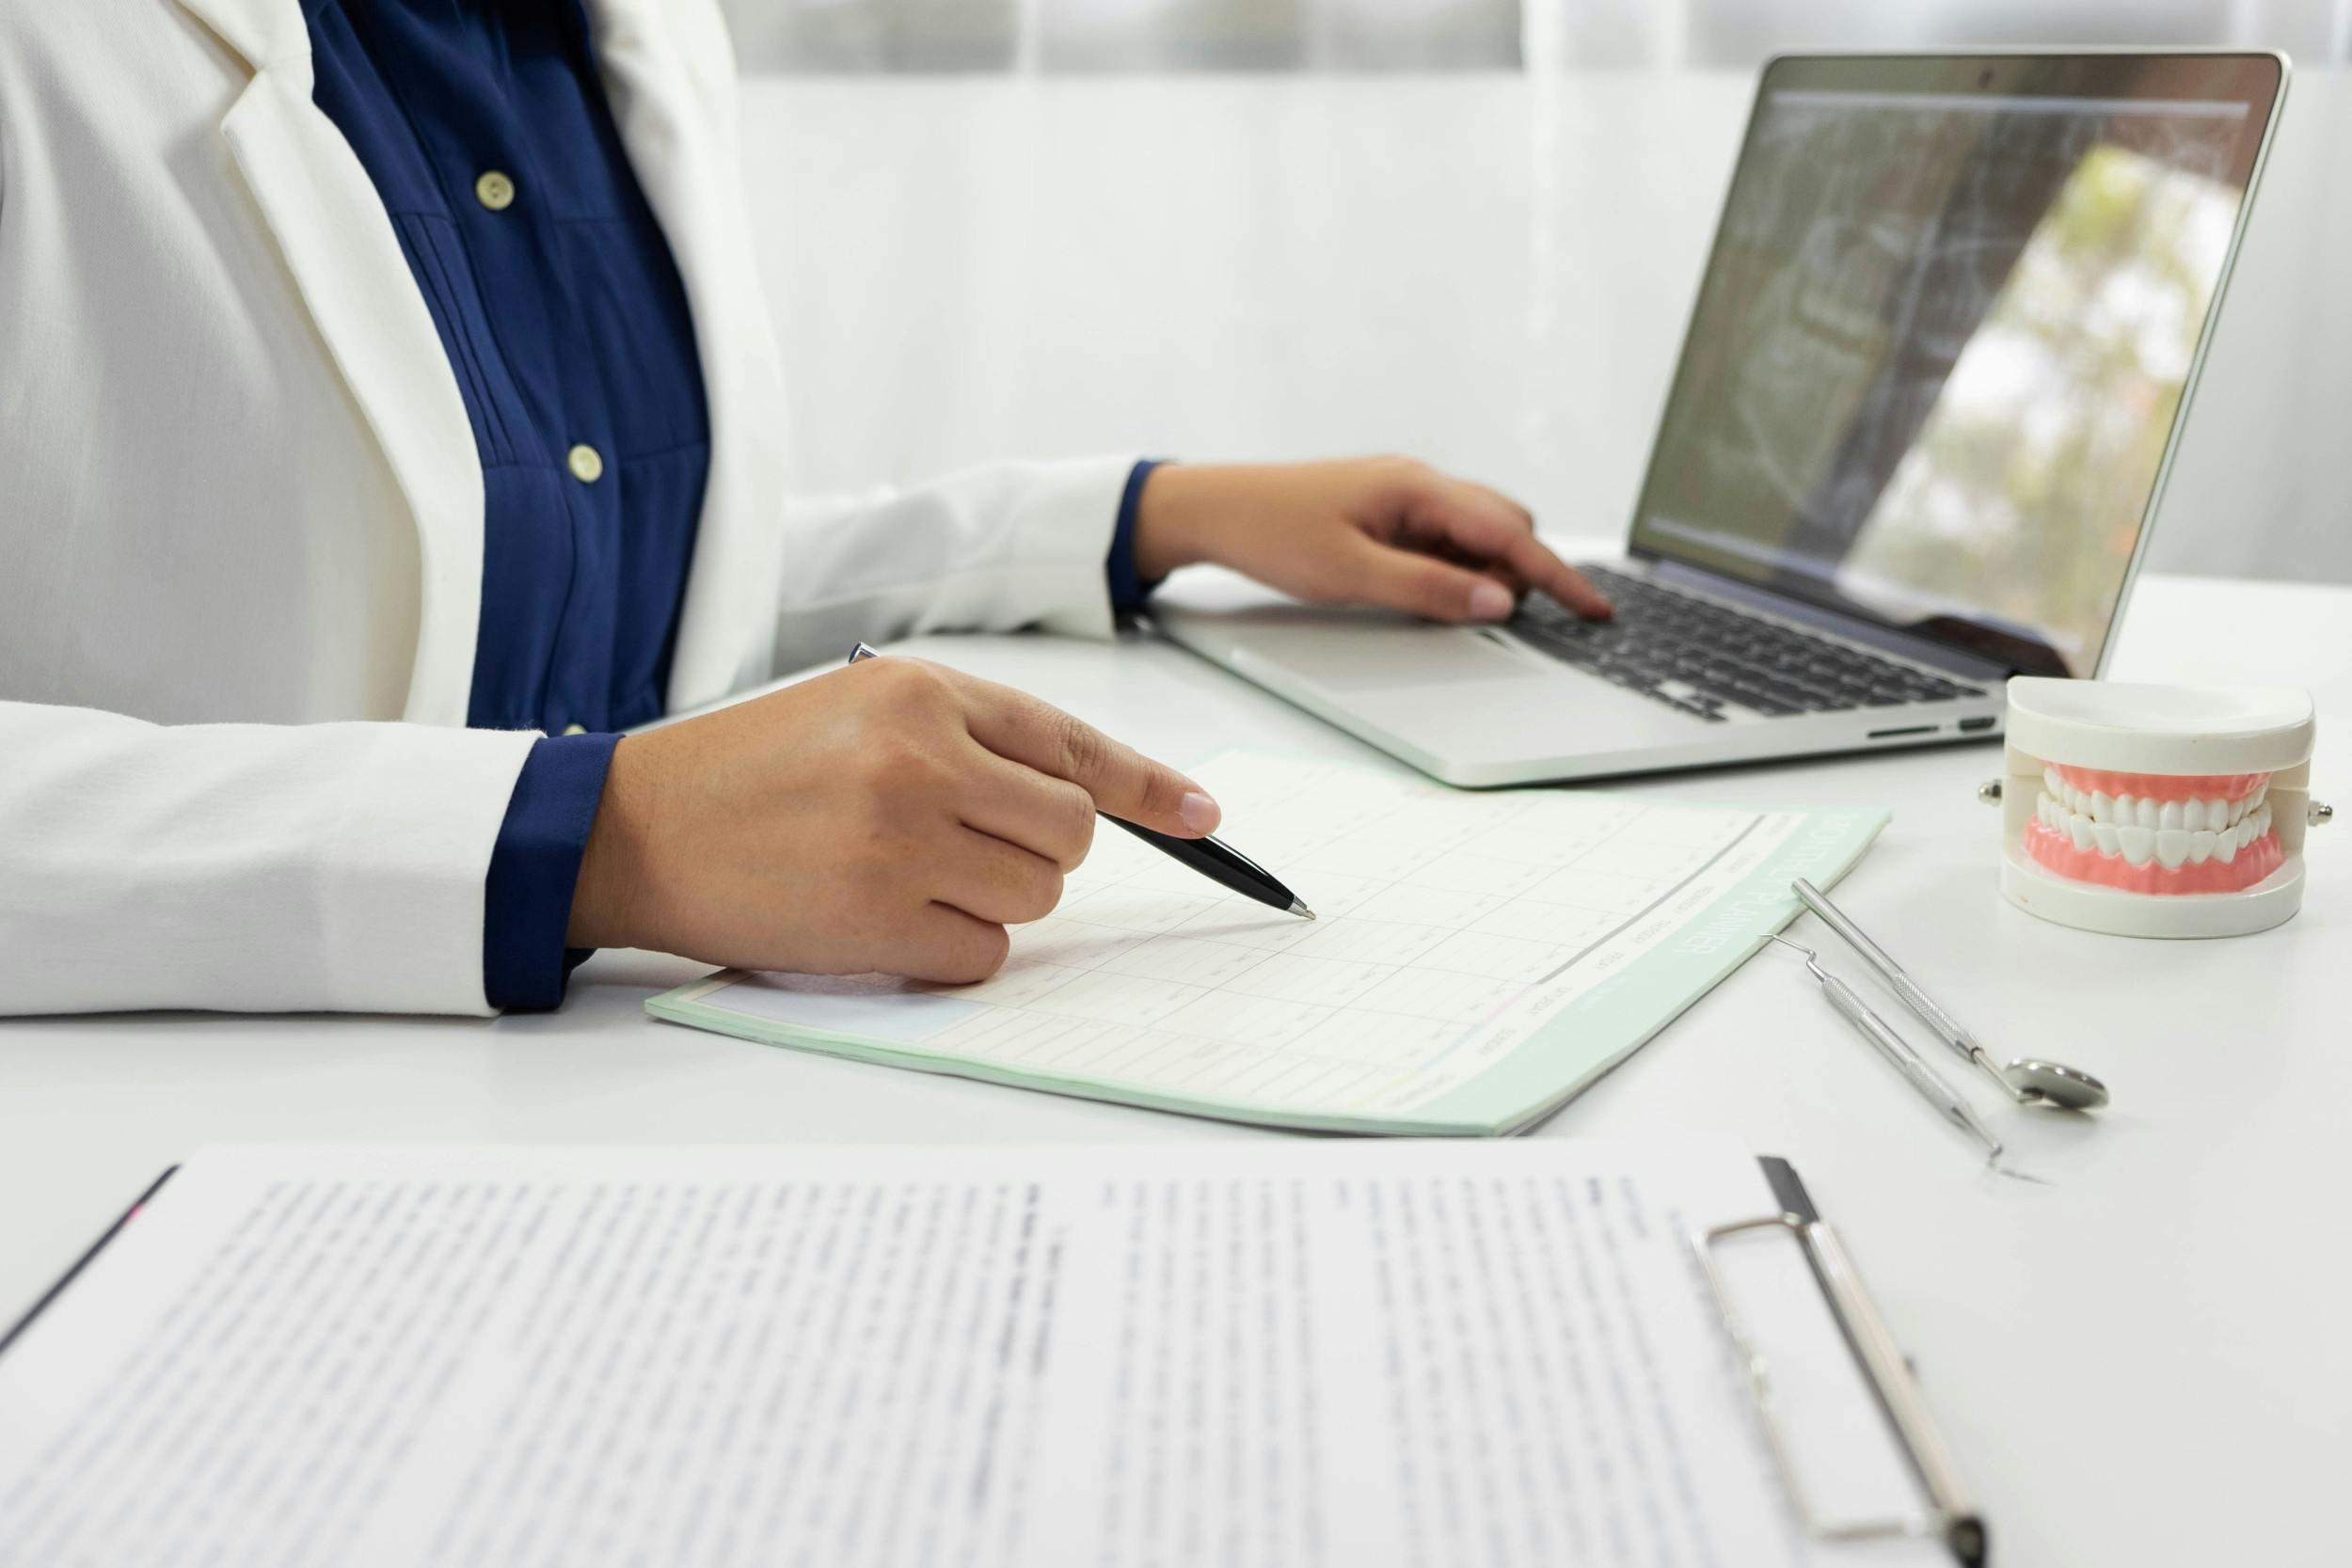 How Electronic Health Records Contribute To Healthcare And Dental Worker Burnout